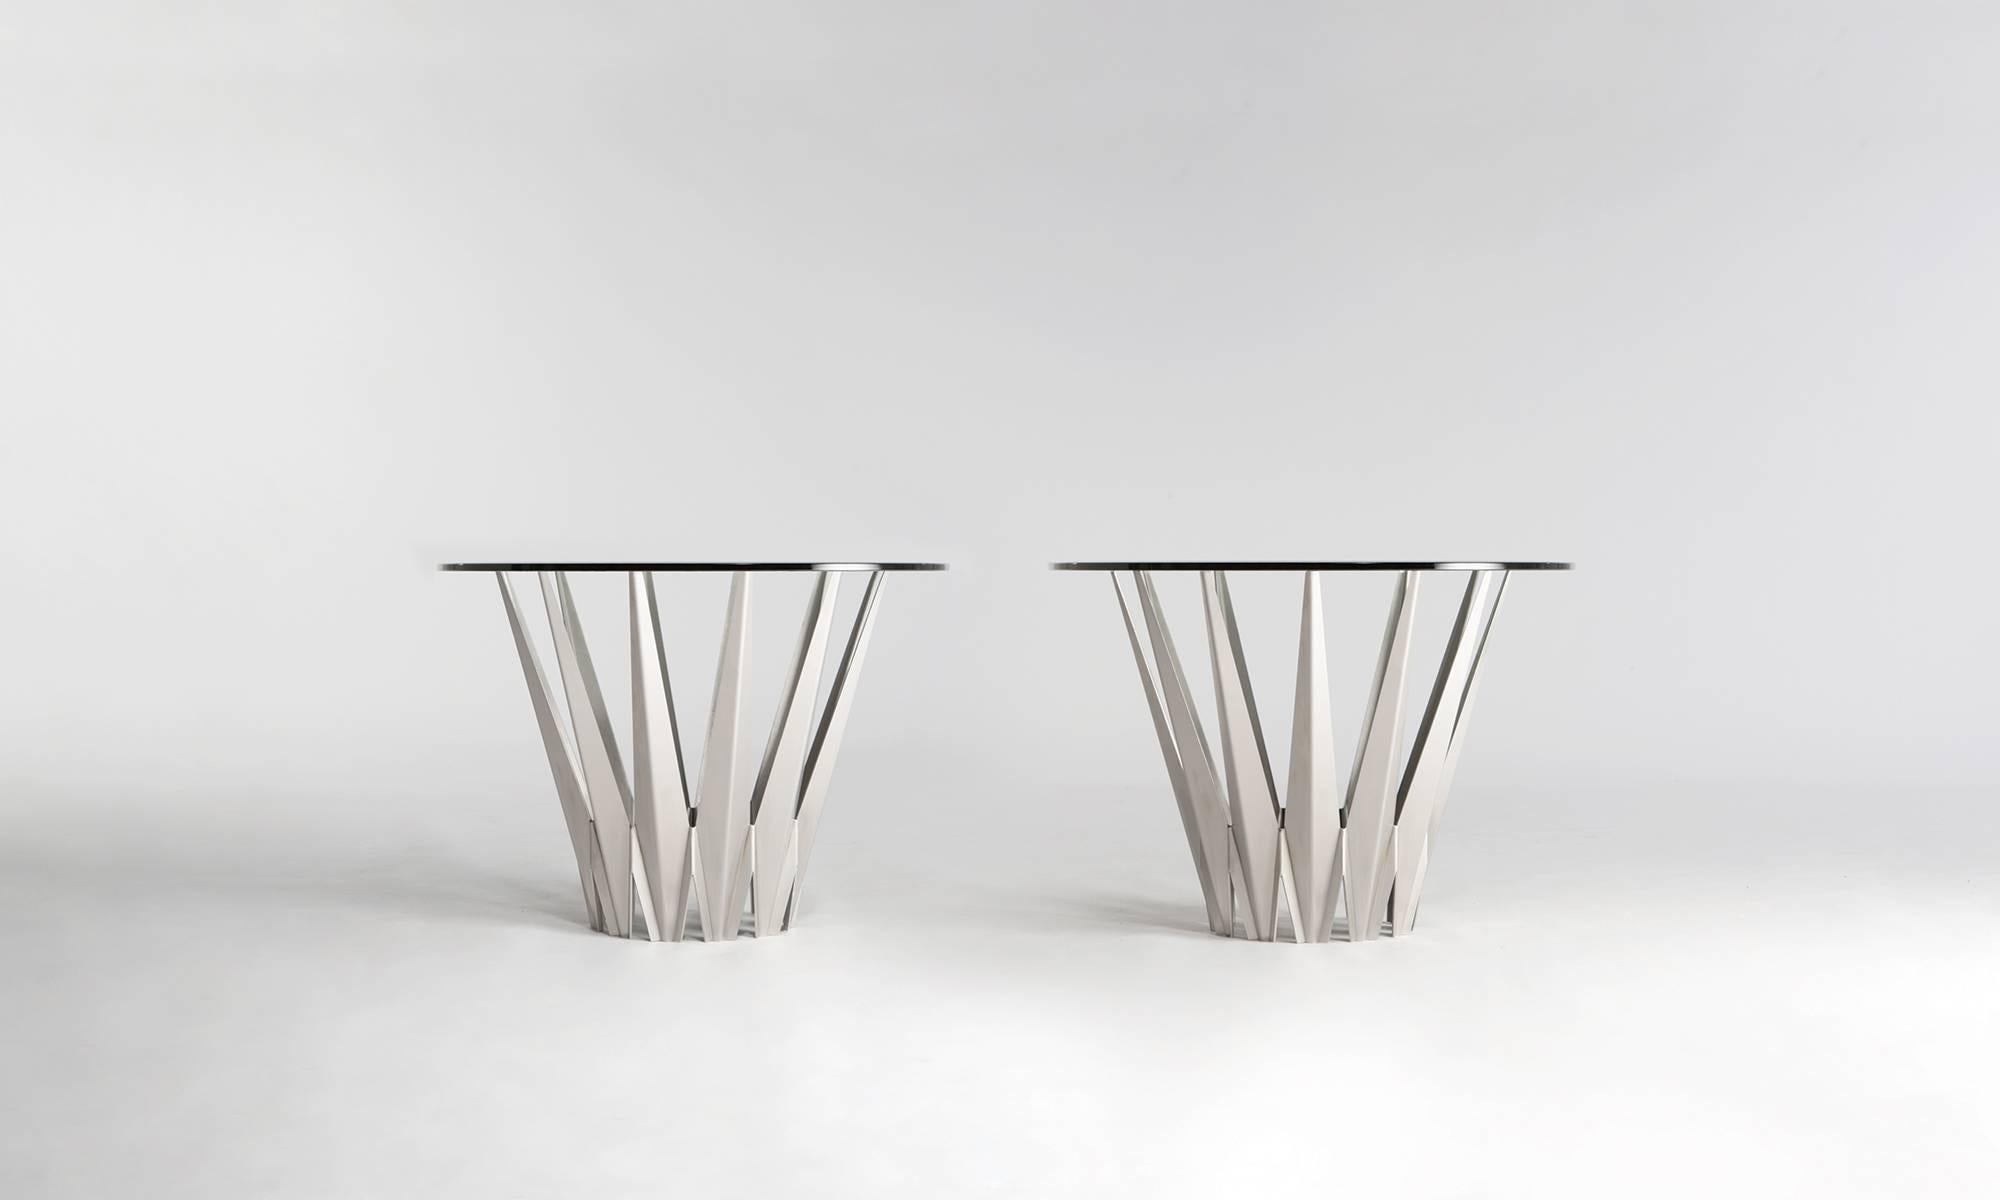 Krystalline Brushed Stainless Steel Side Table. Krystalline is a Made to Order product line available in the brushed stainless steel as well as powder coated colors. The table form can be modified upon request to meet client specifications.